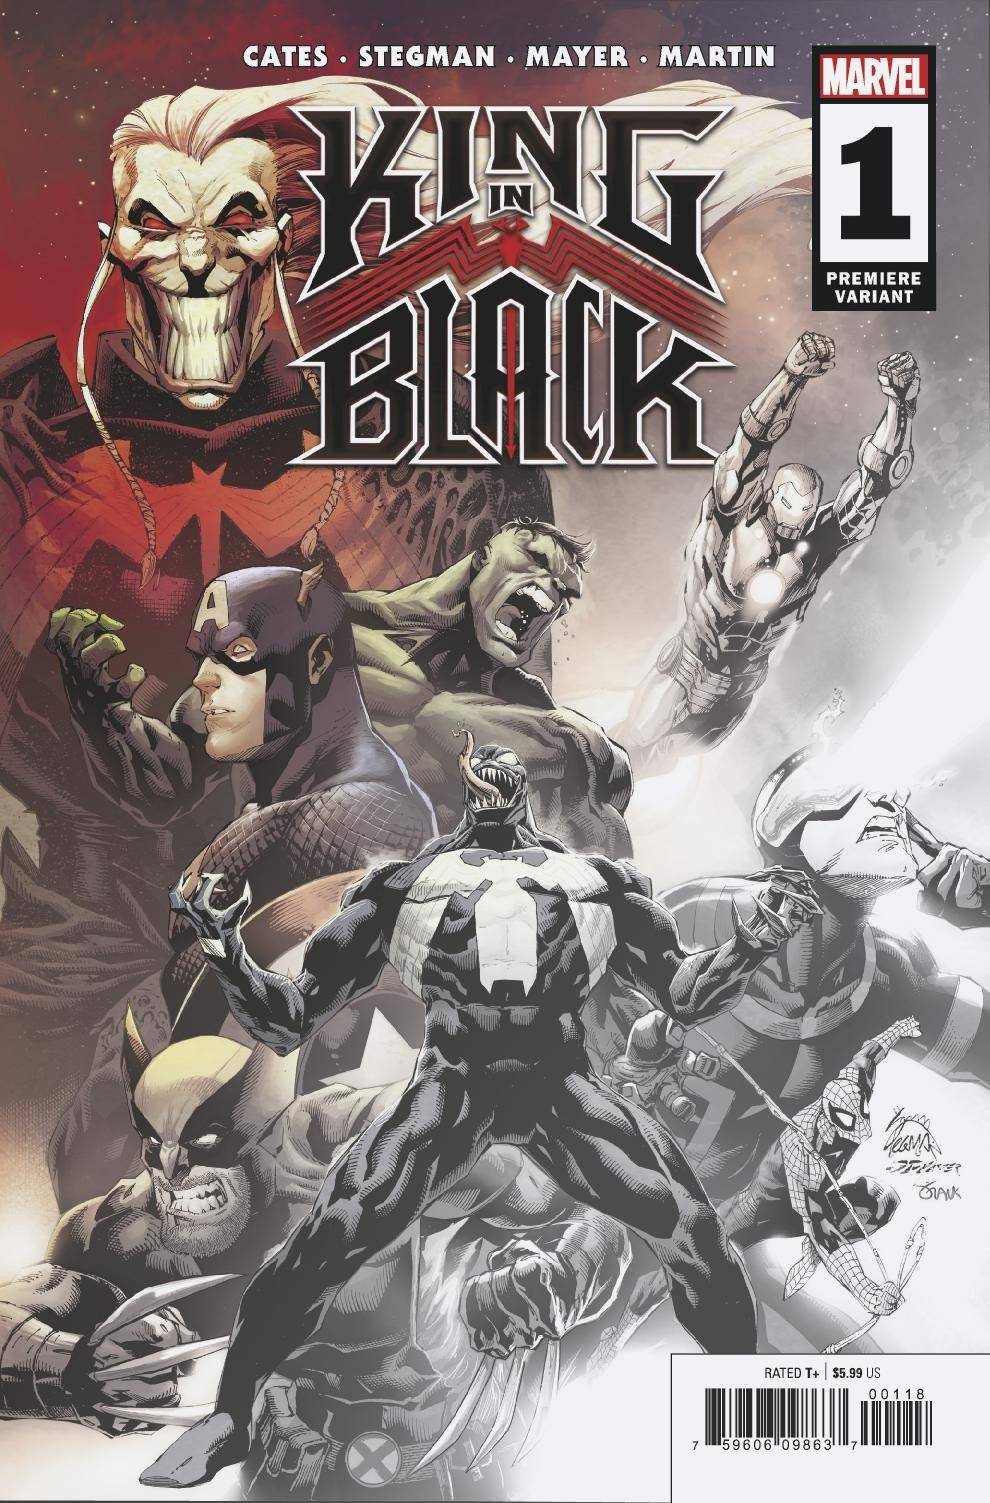 KING IN BLACK #1 (OF 5) STEGMAN PREMIERE VAR | Game Master's Emporium (The New GME)